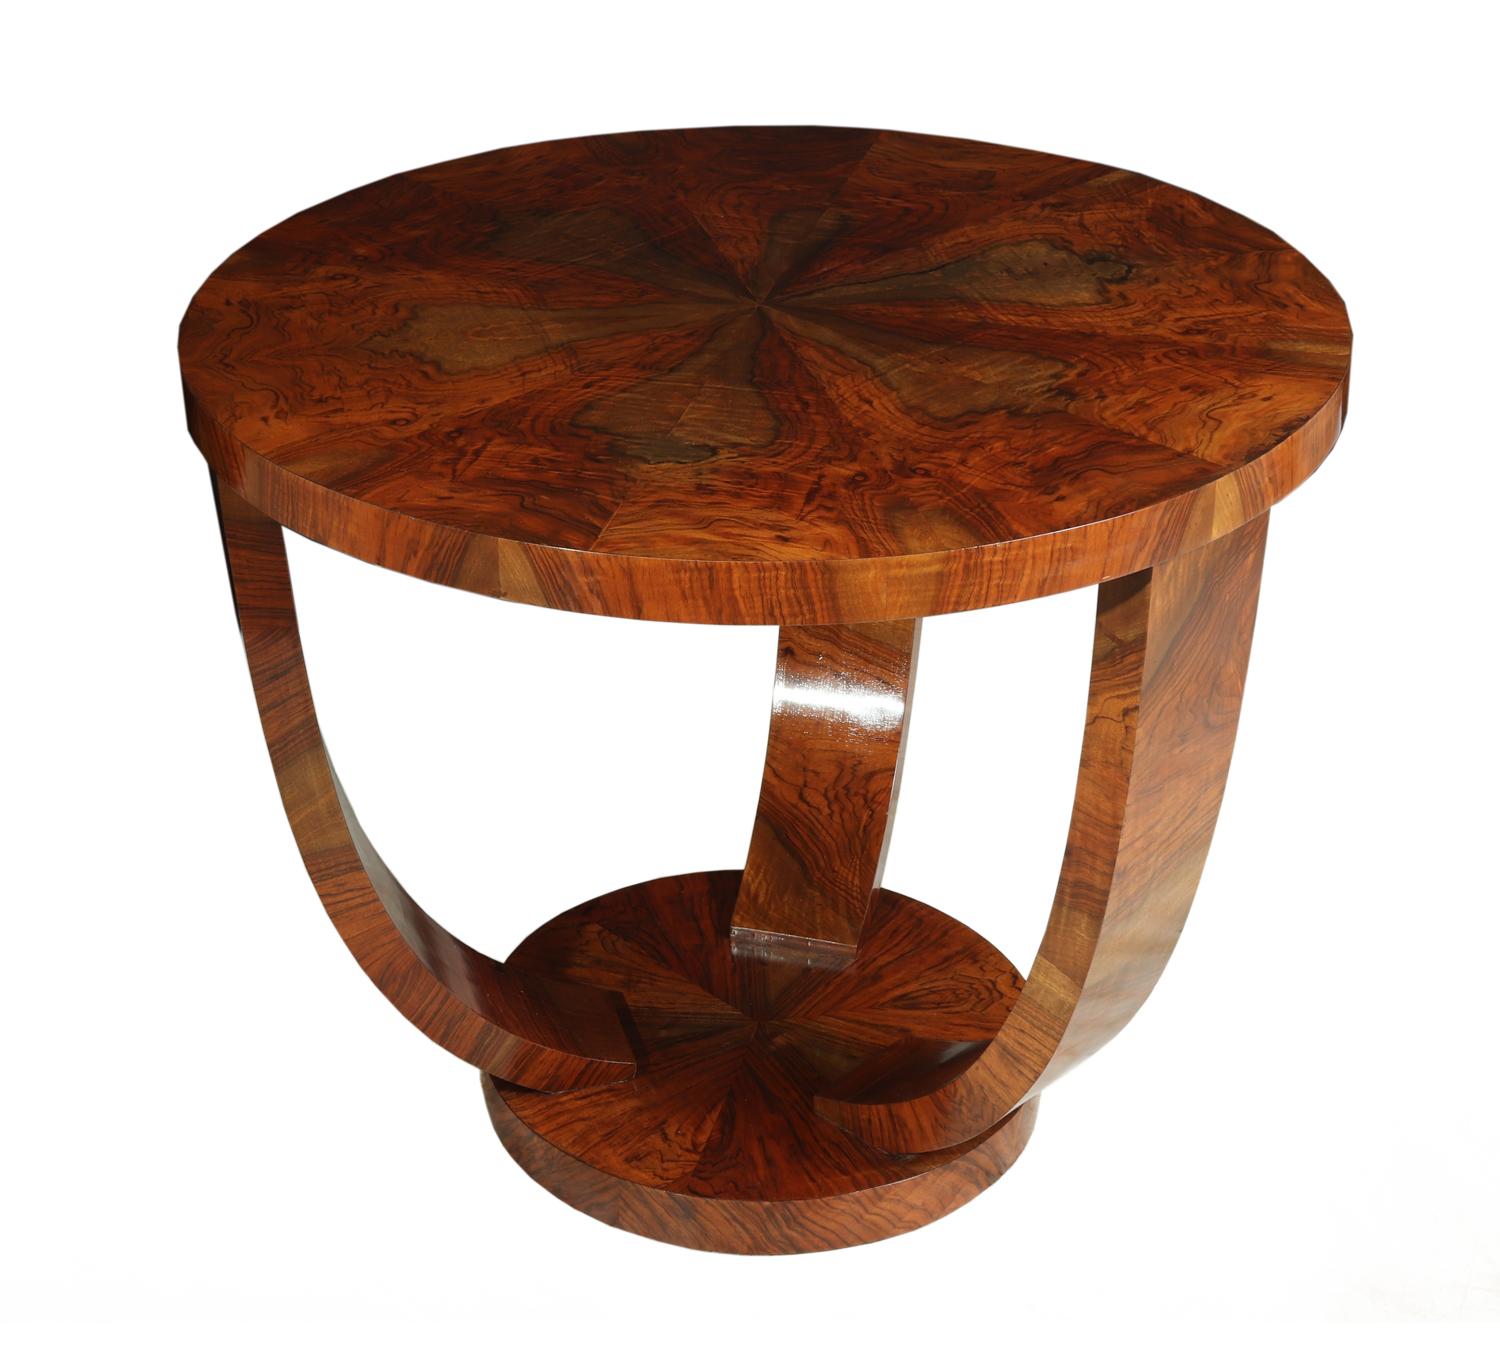 Art Deco walnut coffee table, circa 1930
This Art Deco walnut coffee table is from France in the 1930s. The coffee table has a u shaped base, segmented walnut top and has been fully restored and hand polished to be in excellent condition